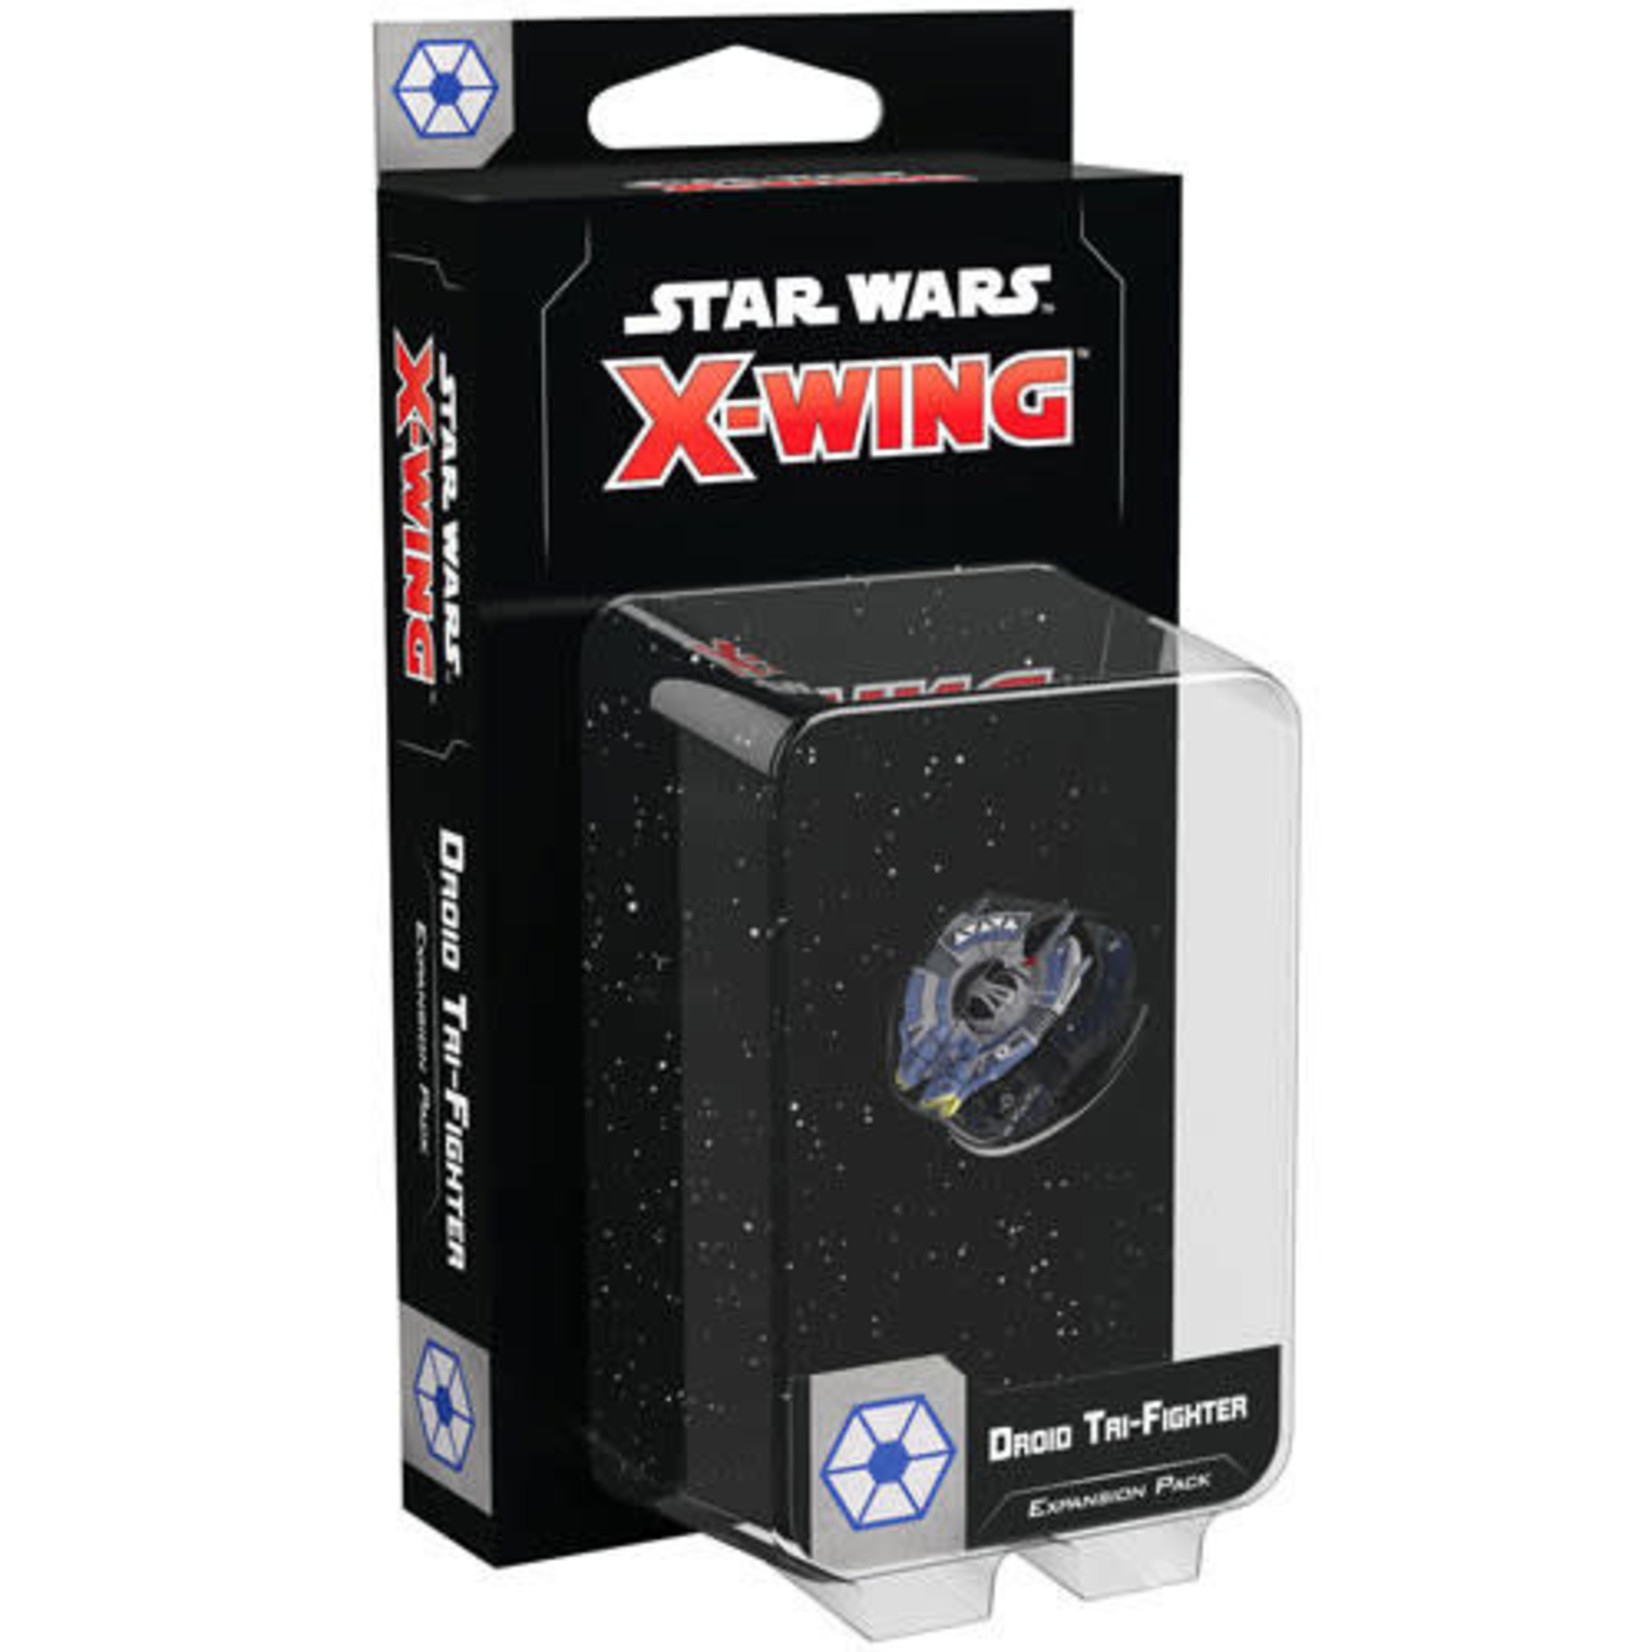 Star Wars X-Wing 2e: Droid Tri-Fighter Expansion